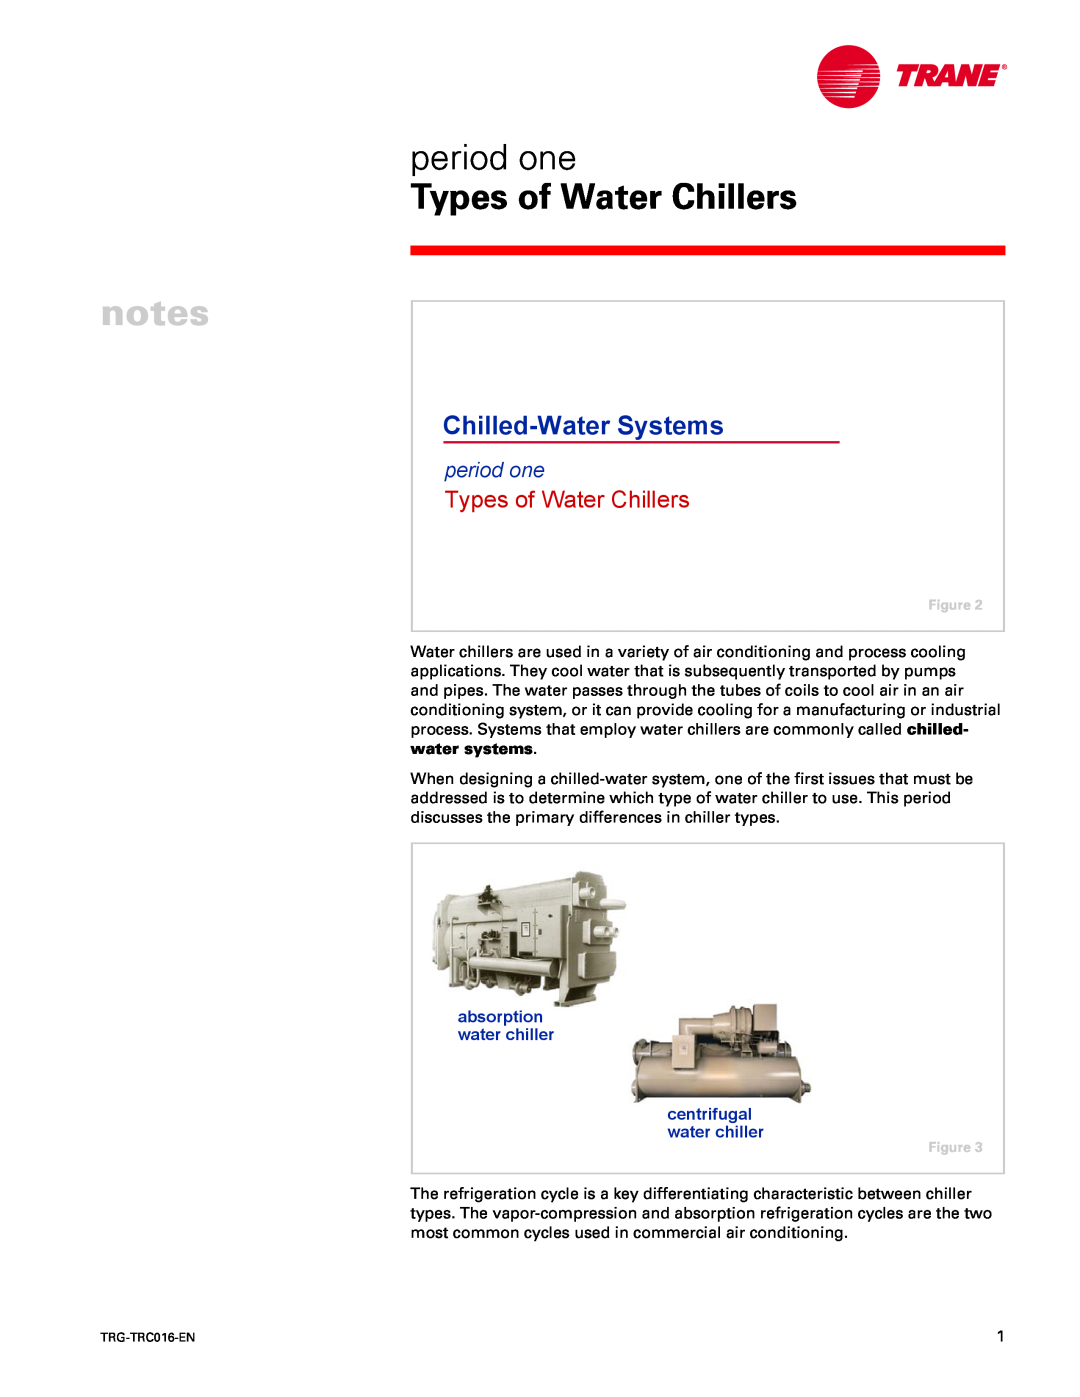 Trane TRG-TRC016-EN manual notes, period one, Types of Water Chillers, Chilled-WaterSystems, water systems 